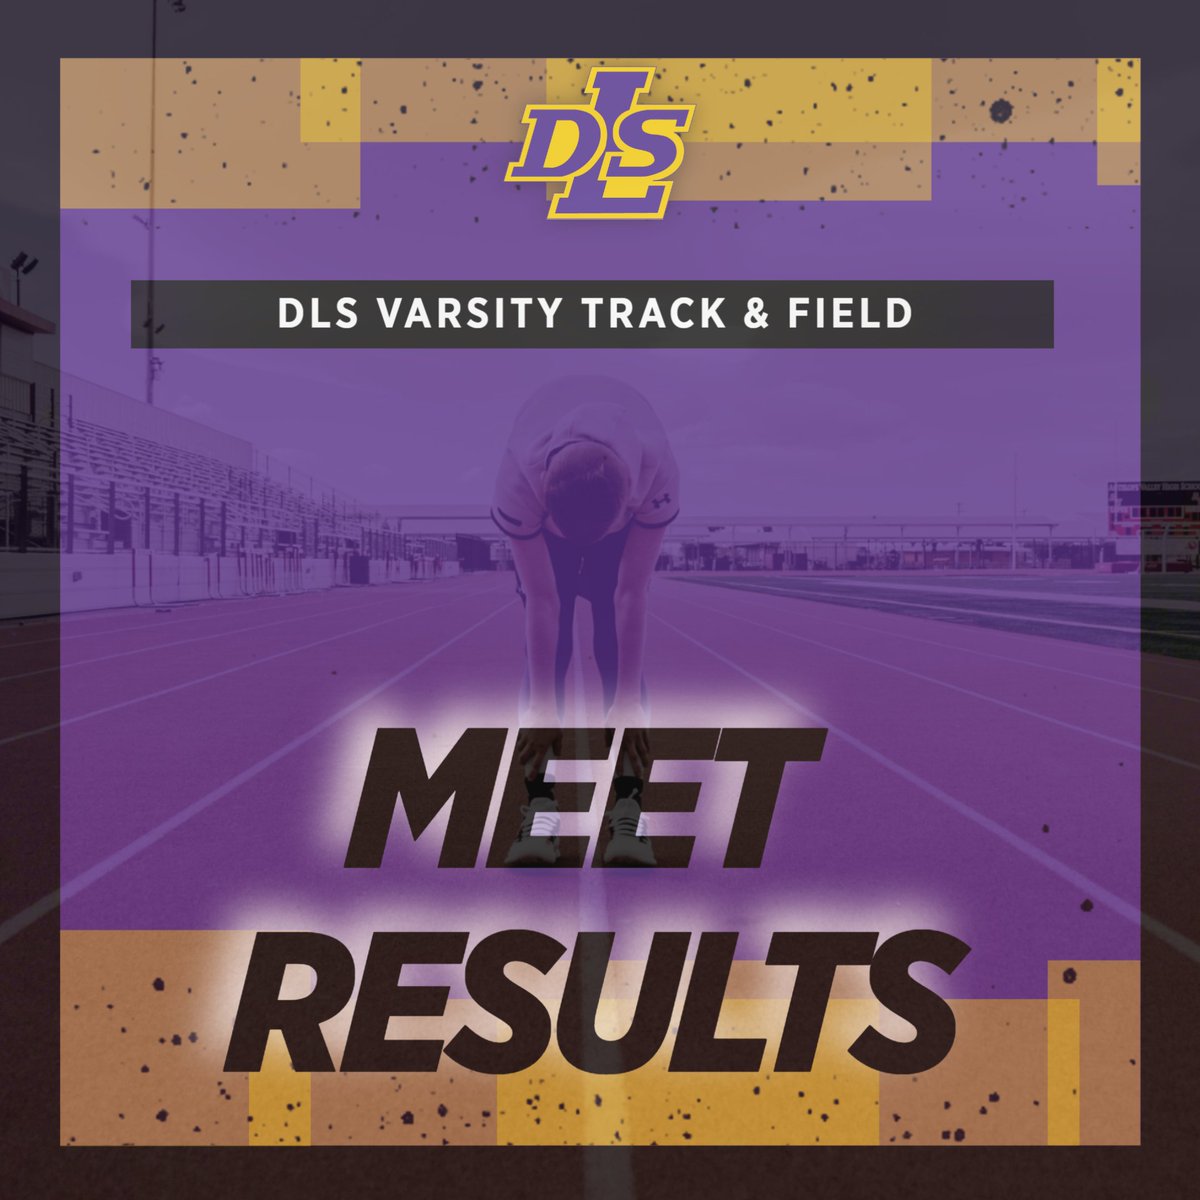 DLS Varsity Track competed in the Farmington Invitational on Saturday, and finished in 12th place out of 49 competing teams. Competing athletes had 11 PRs on the day. 
Amazing work, Pilots!

#PilotPride